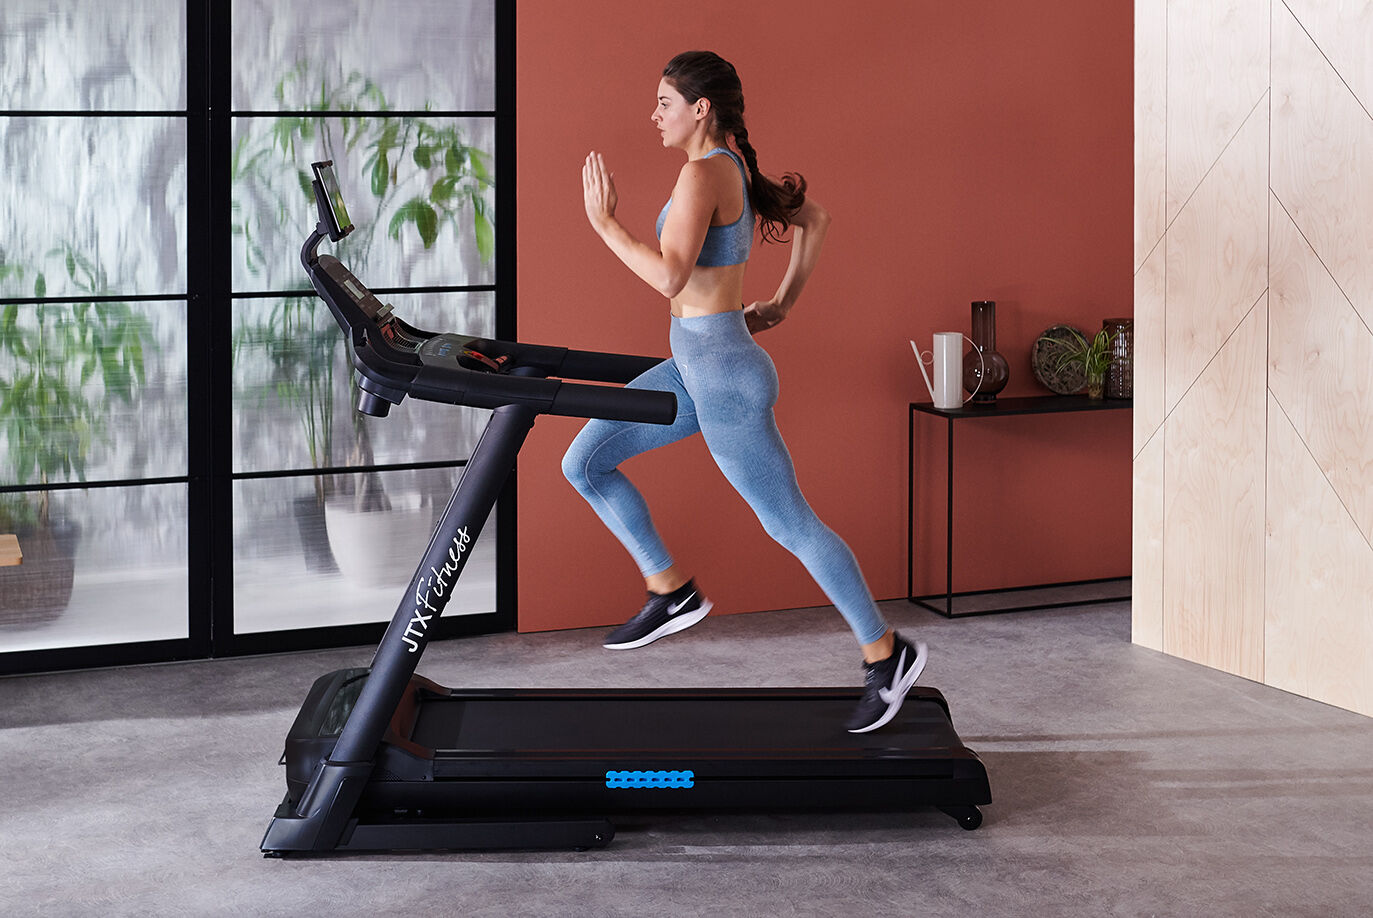 Home Treadmill For Sale From JTX Fitness